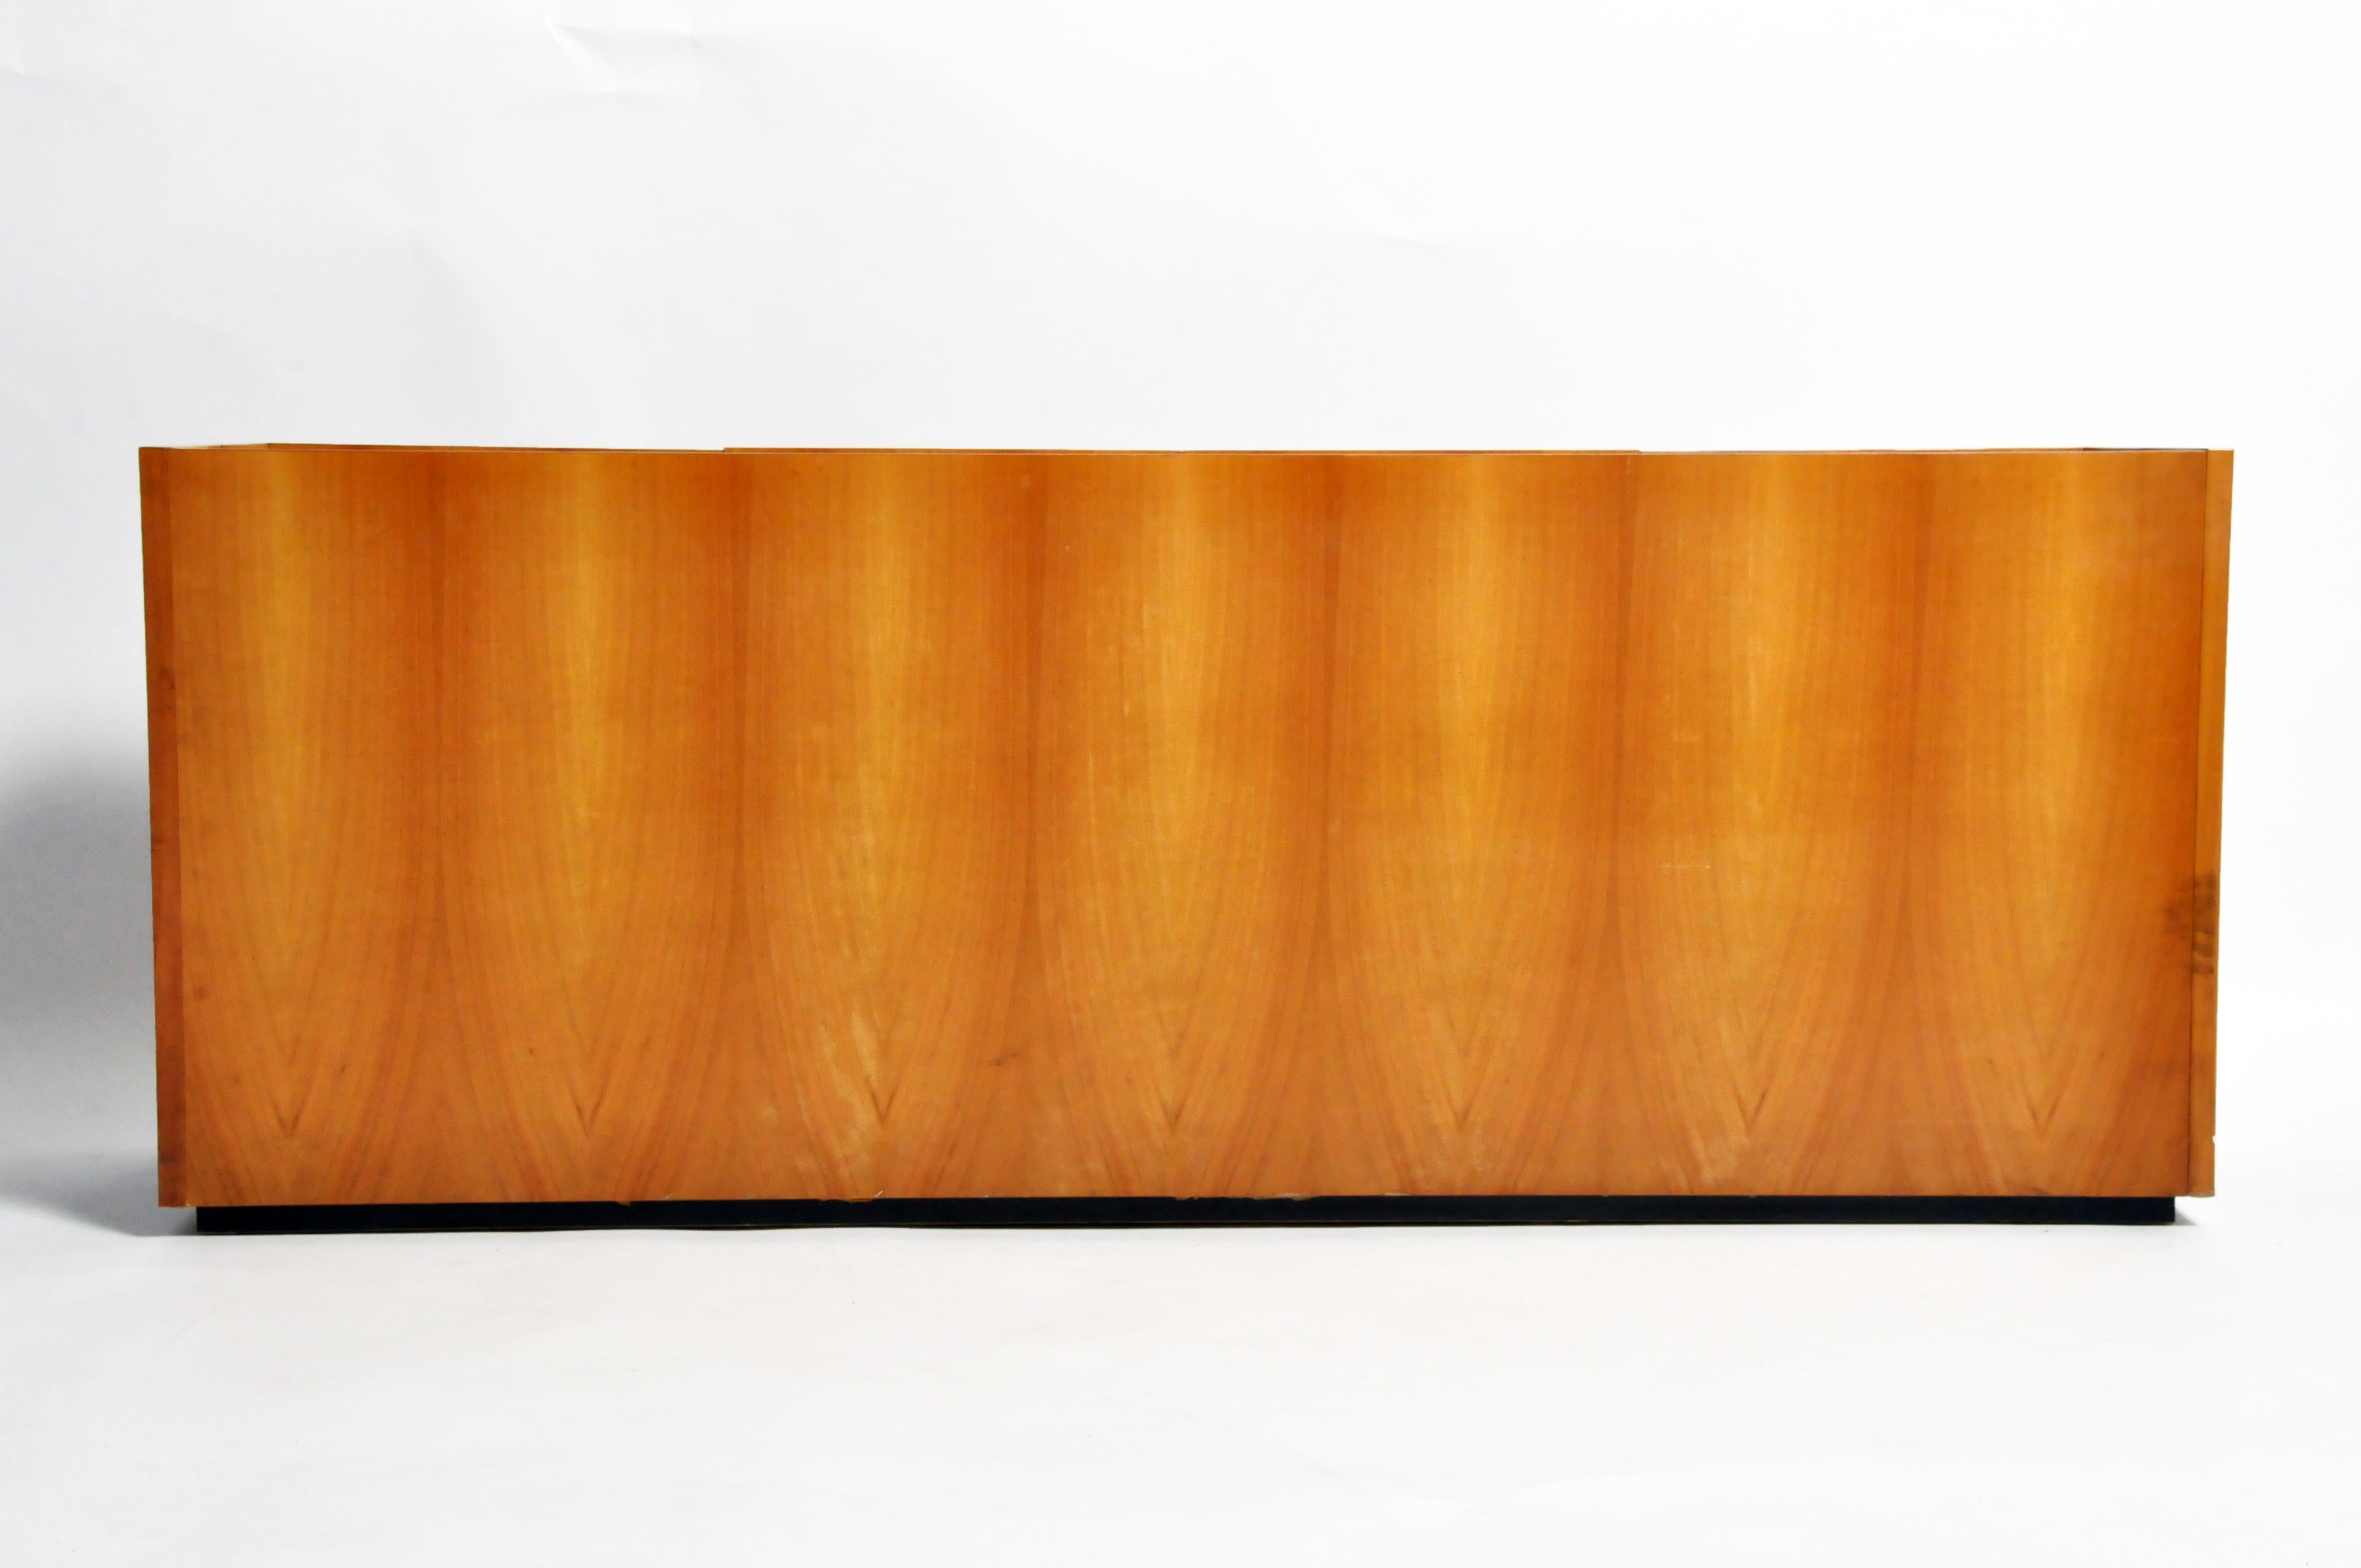 This sleek 1970s French sideboard also makes an excellent bar. The face and sides are covered in book-matched Walnut veneer with a very light stain. The end doors pivot open from the sides and feature built in shelves for holding liquor bottles. In